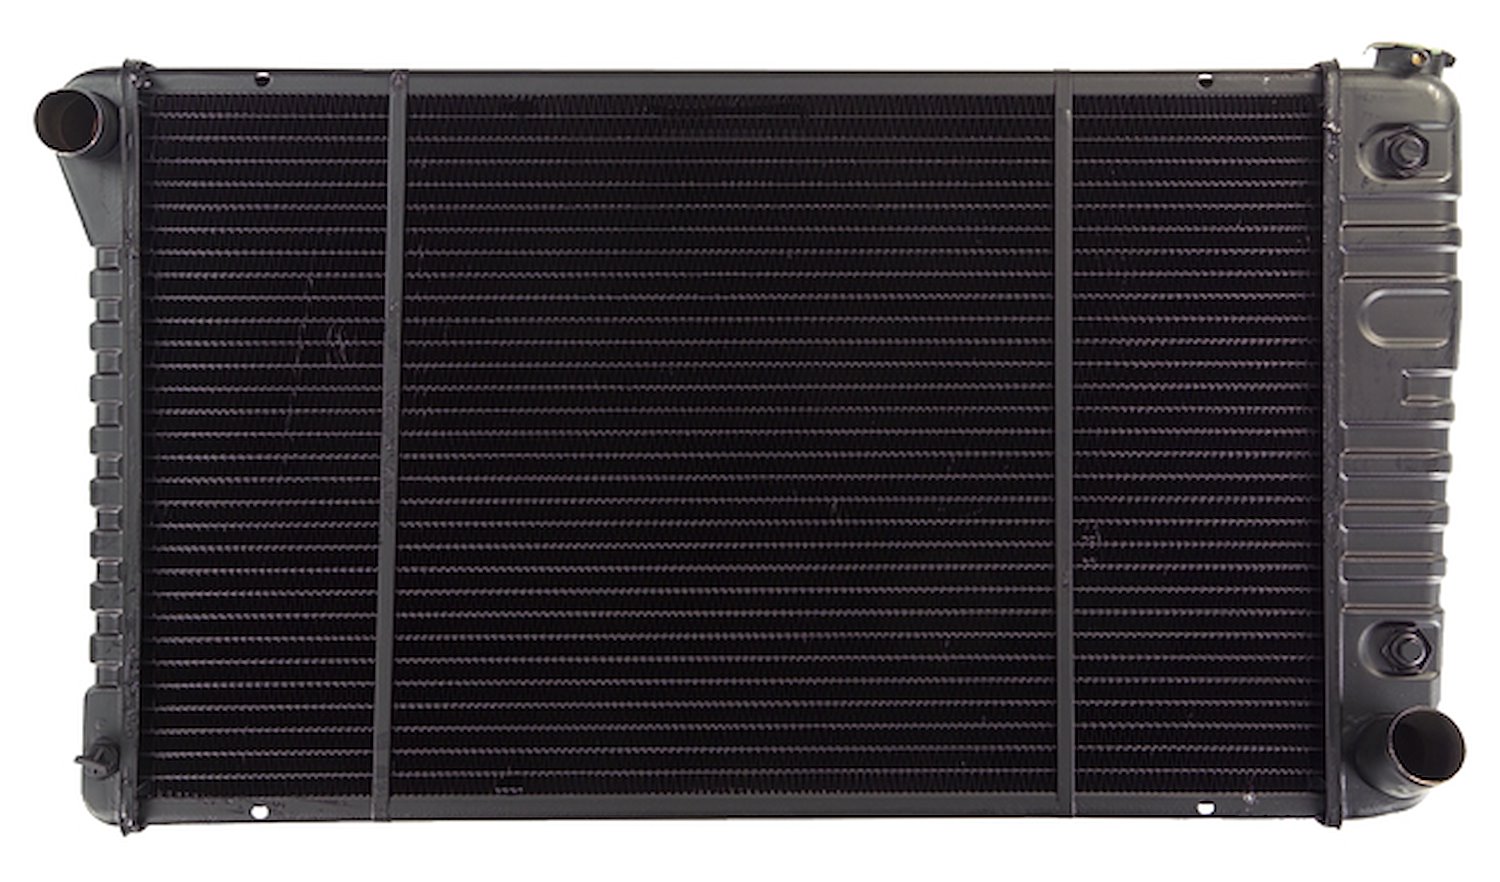 Replacement Radiator for 1968-1972 Chevrolet C10, C20 Truck w/5.0L or 5.7L Engine [4-Row]